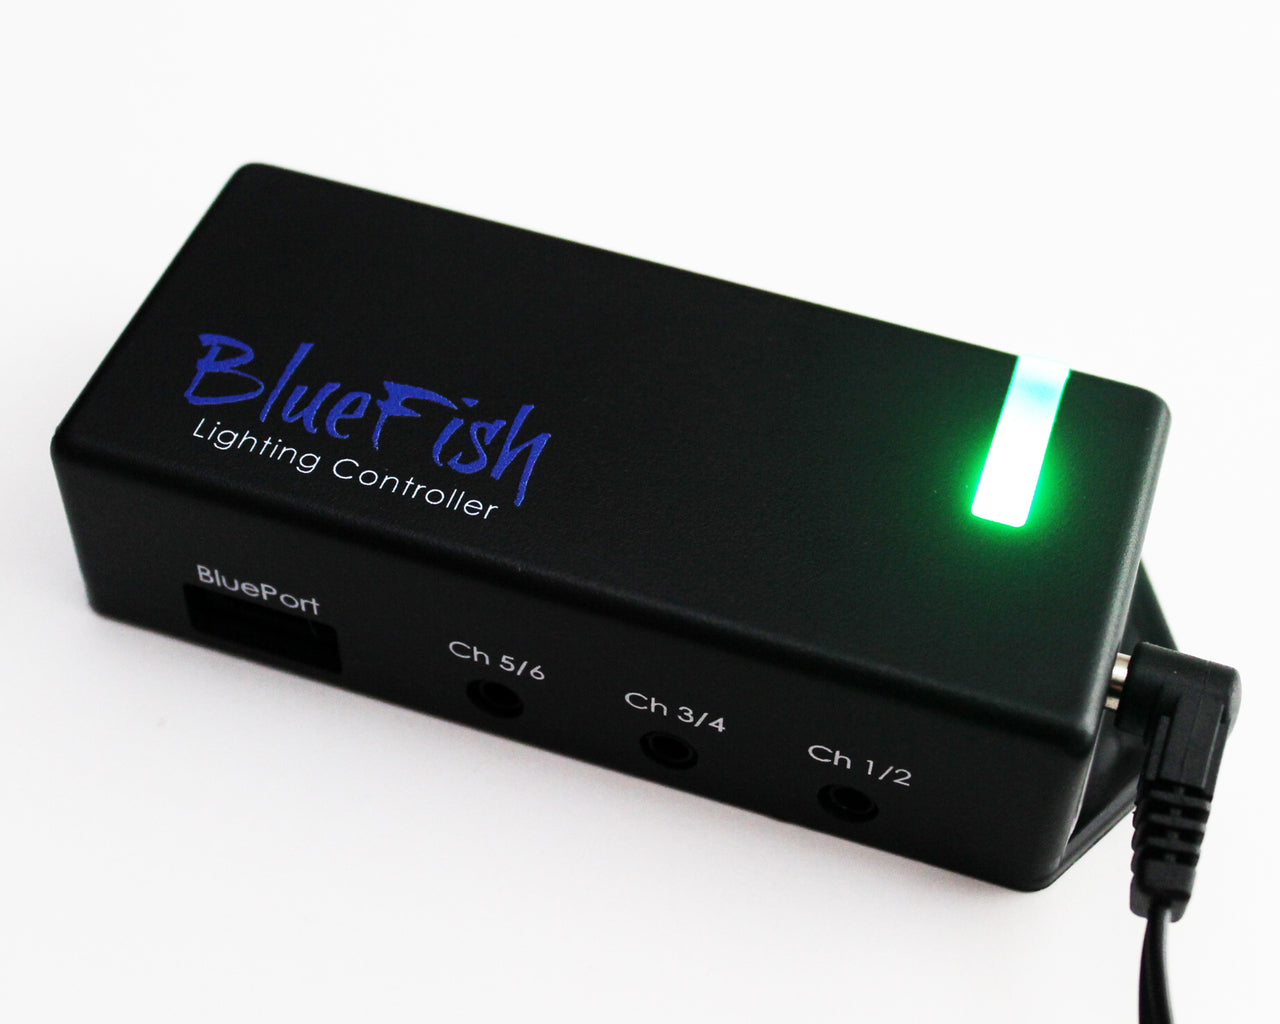 Bluefish LED CONTROLLER - With Phone App